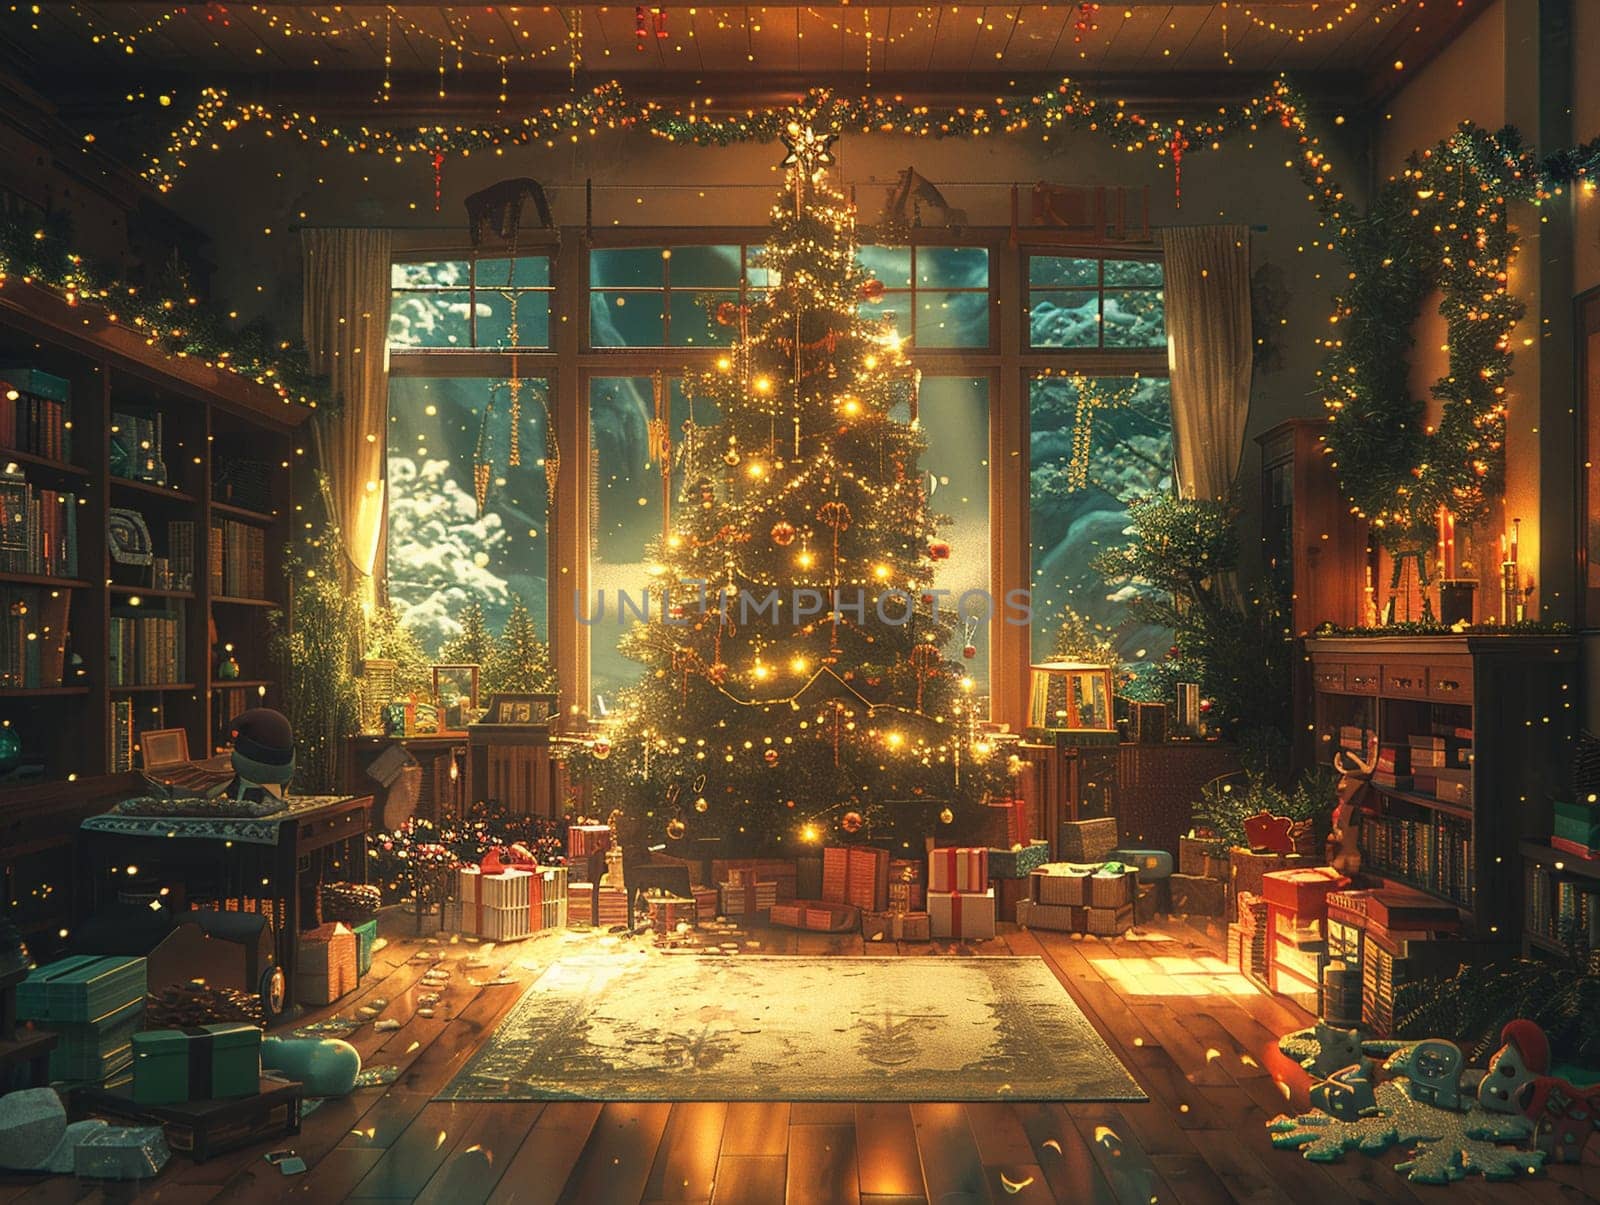 Christmas Eve in a cozy anime household, with warm lights and a sense of togetherness.